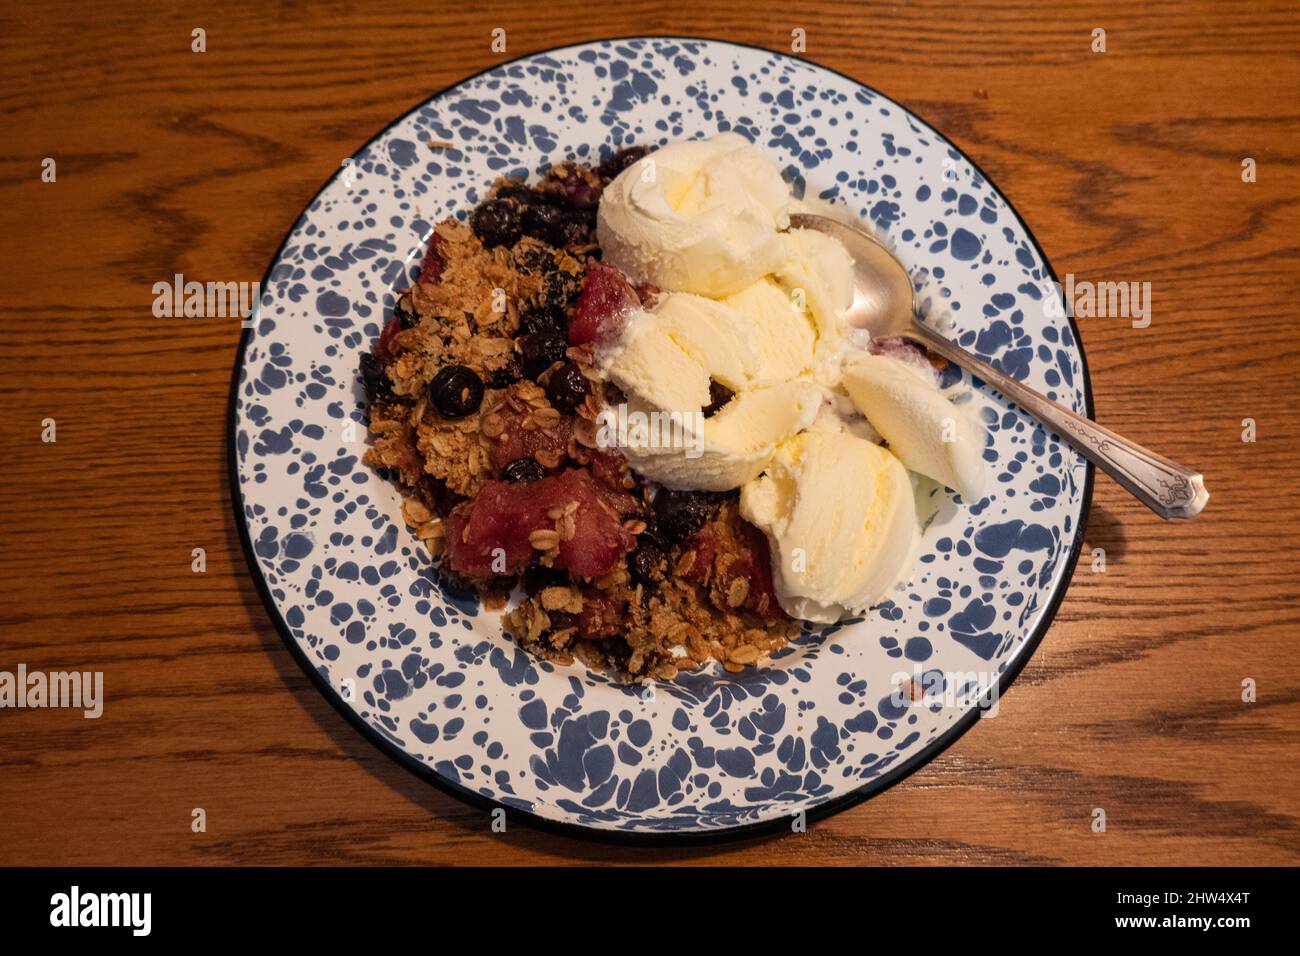 A large serving of apple and blueberry crisp with vanilla ice cream on a blue and white metal plate on an oak table. Stock Photo